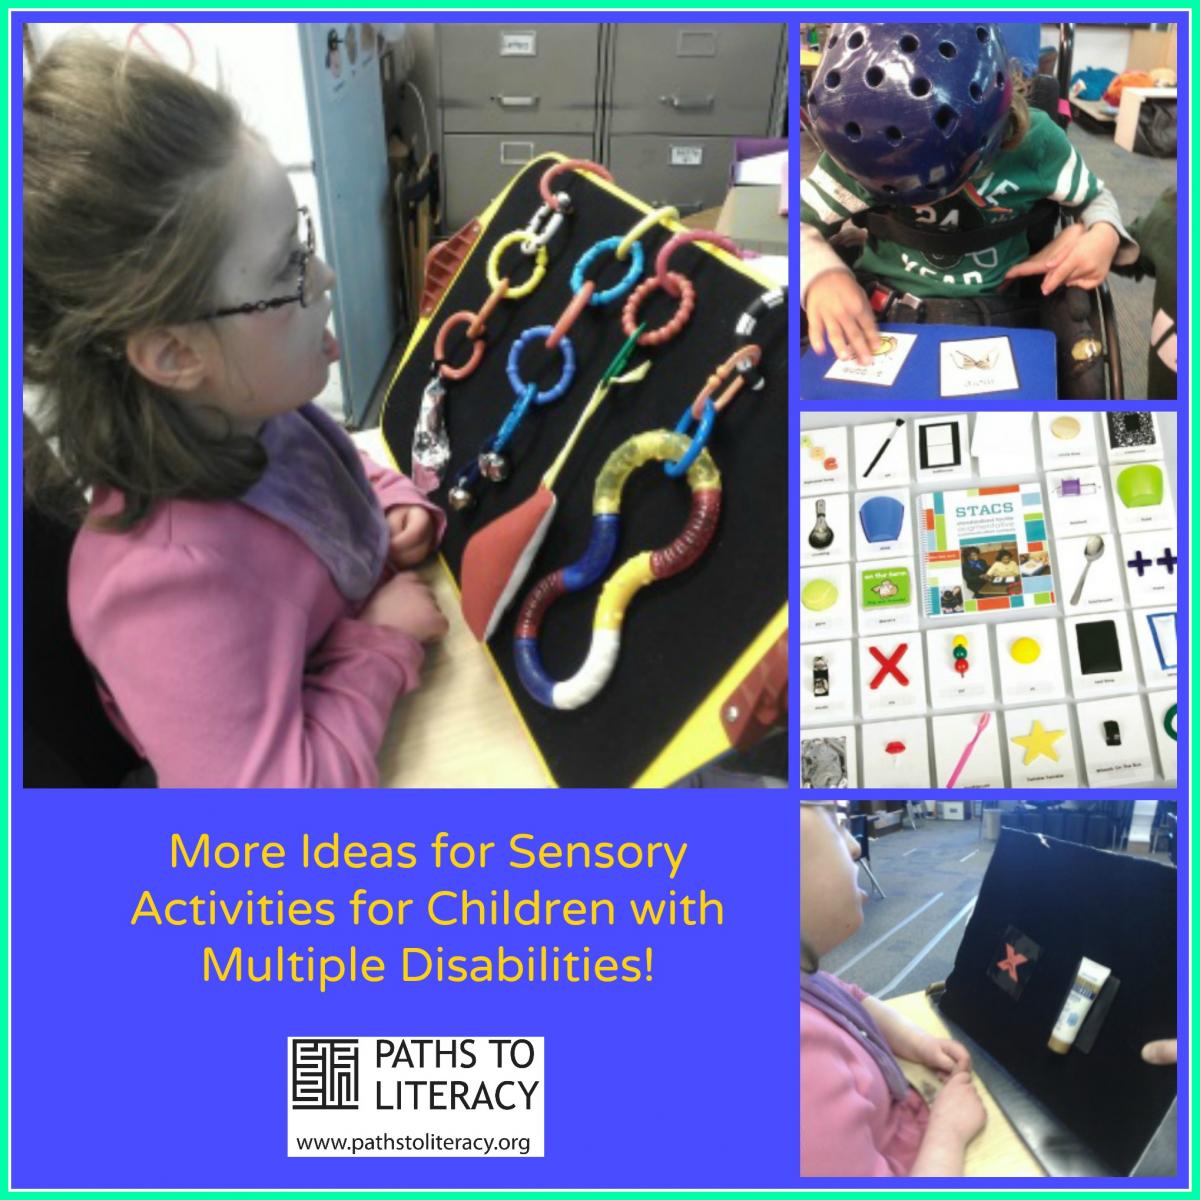 More sensory activities for students with multiple disabilities